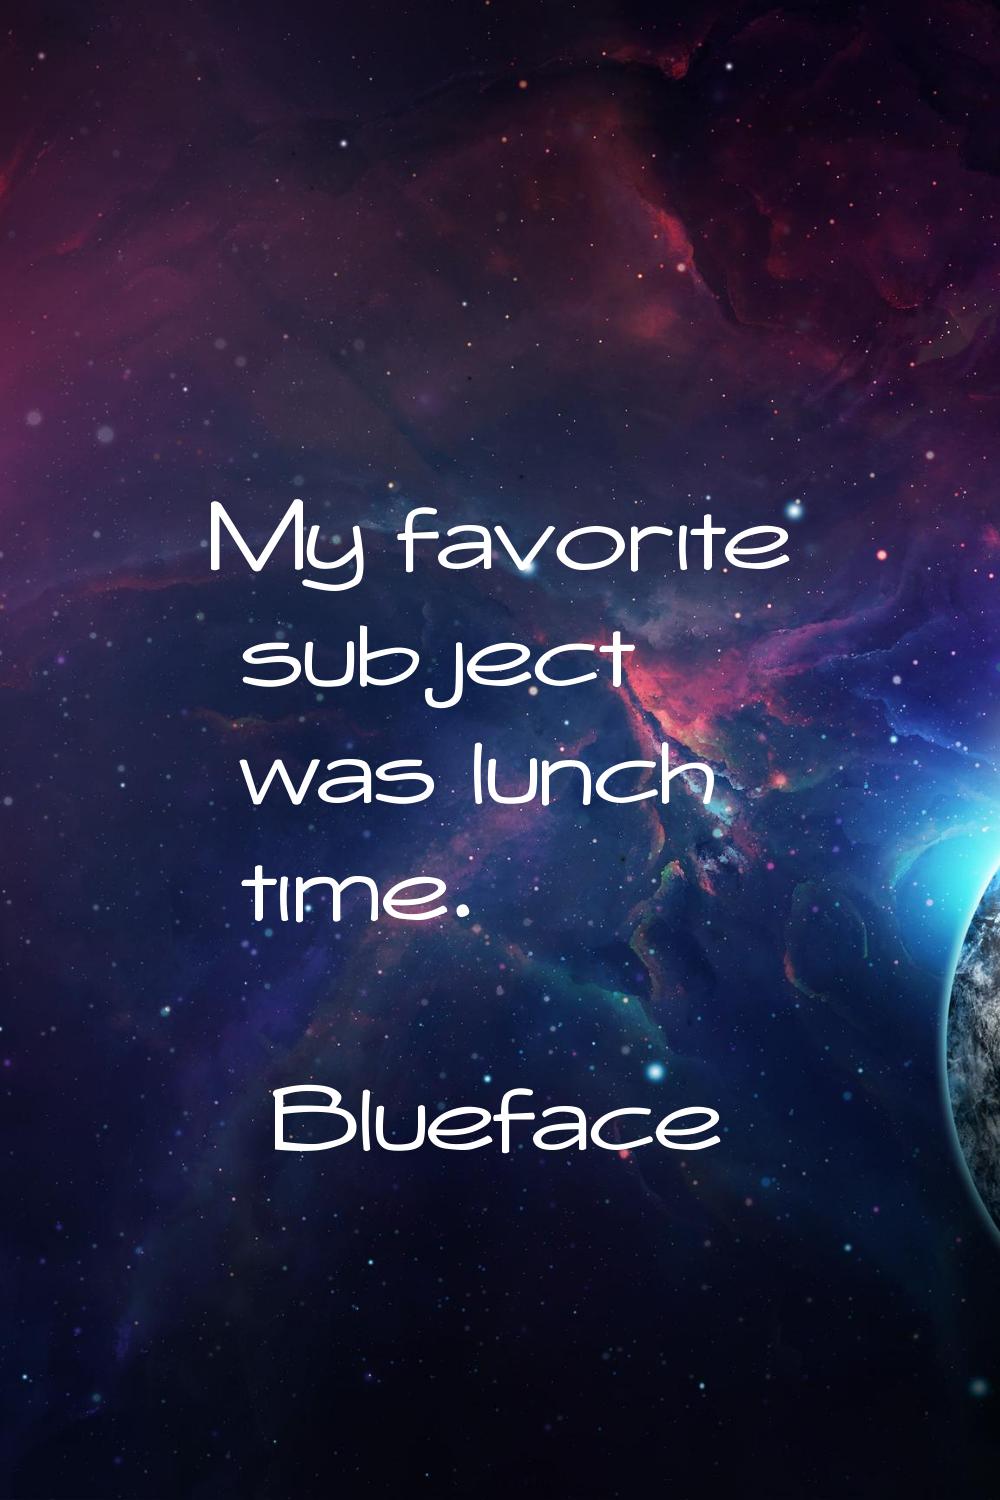 My favorite subject was lunch time.